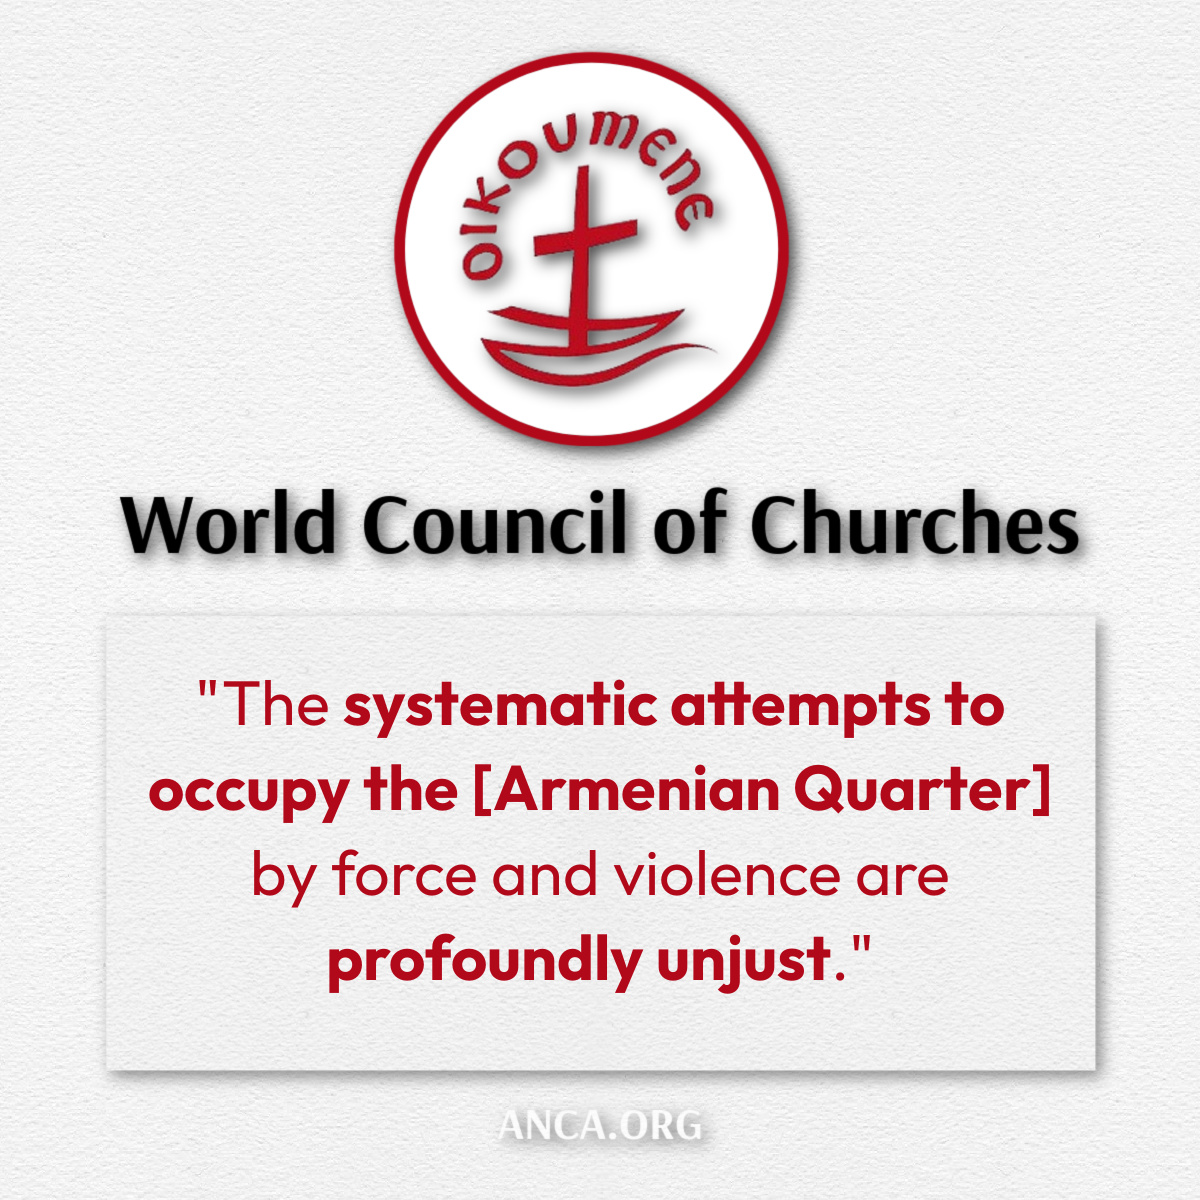 WCC Defends Rights of Armenian community in Jerusalem: World Council of Churches - @Oikoumene - is “deeply disturbed” by reports of continuous assaults on the Armenian community and other Palestinian residents of Jerusalem. Follow @SavetheArQ